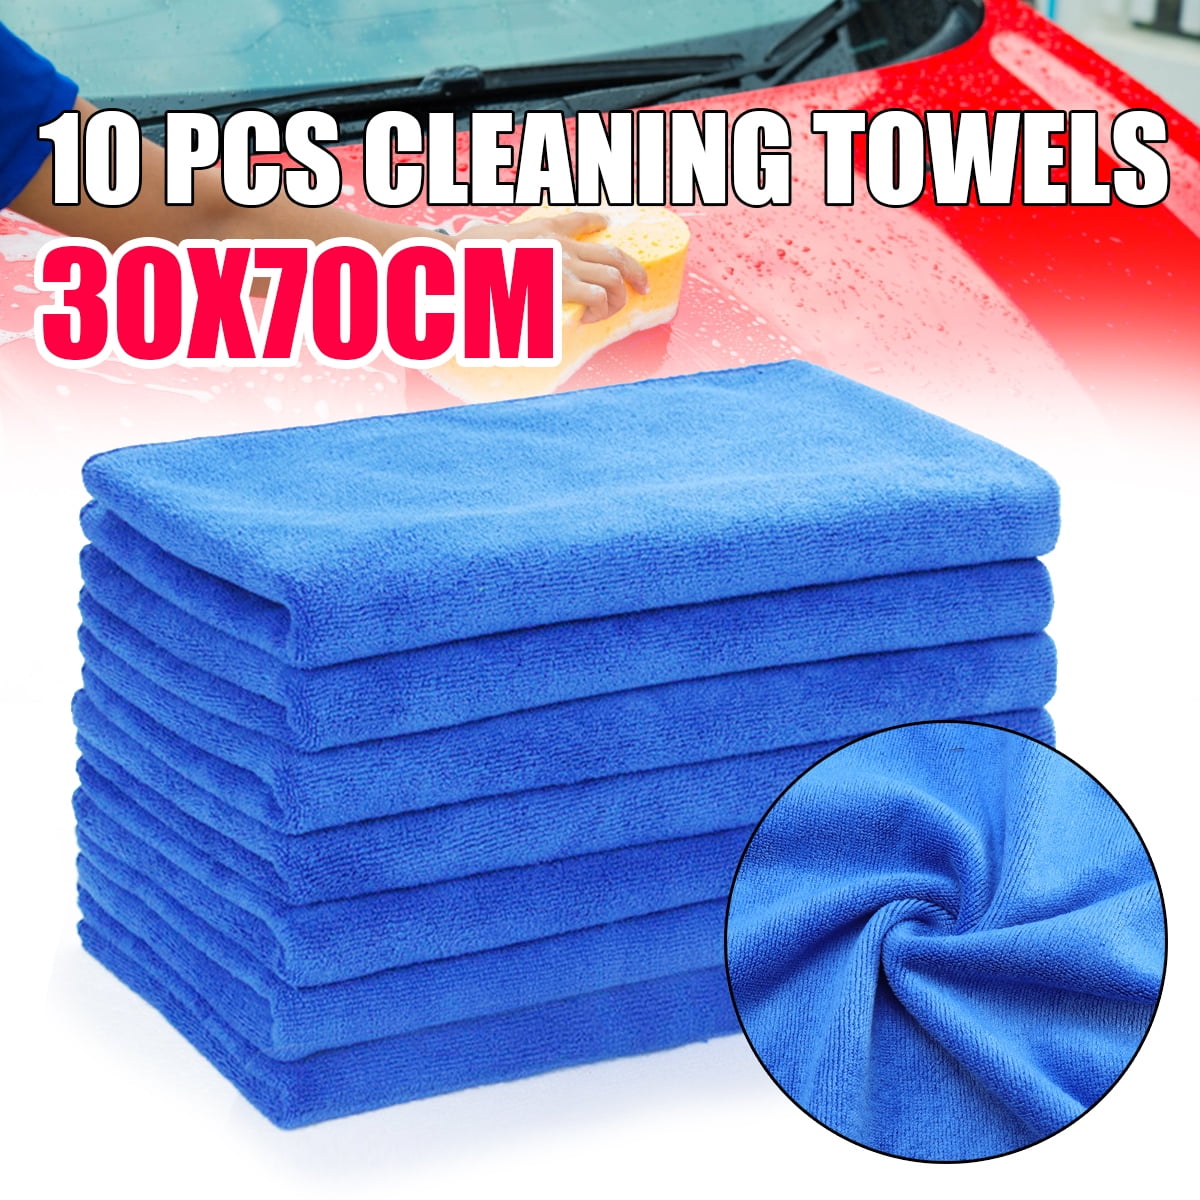 10 x Microfibre Cleaning Soft Cloths Auto Car Detailing Wash Towel Home Duster 